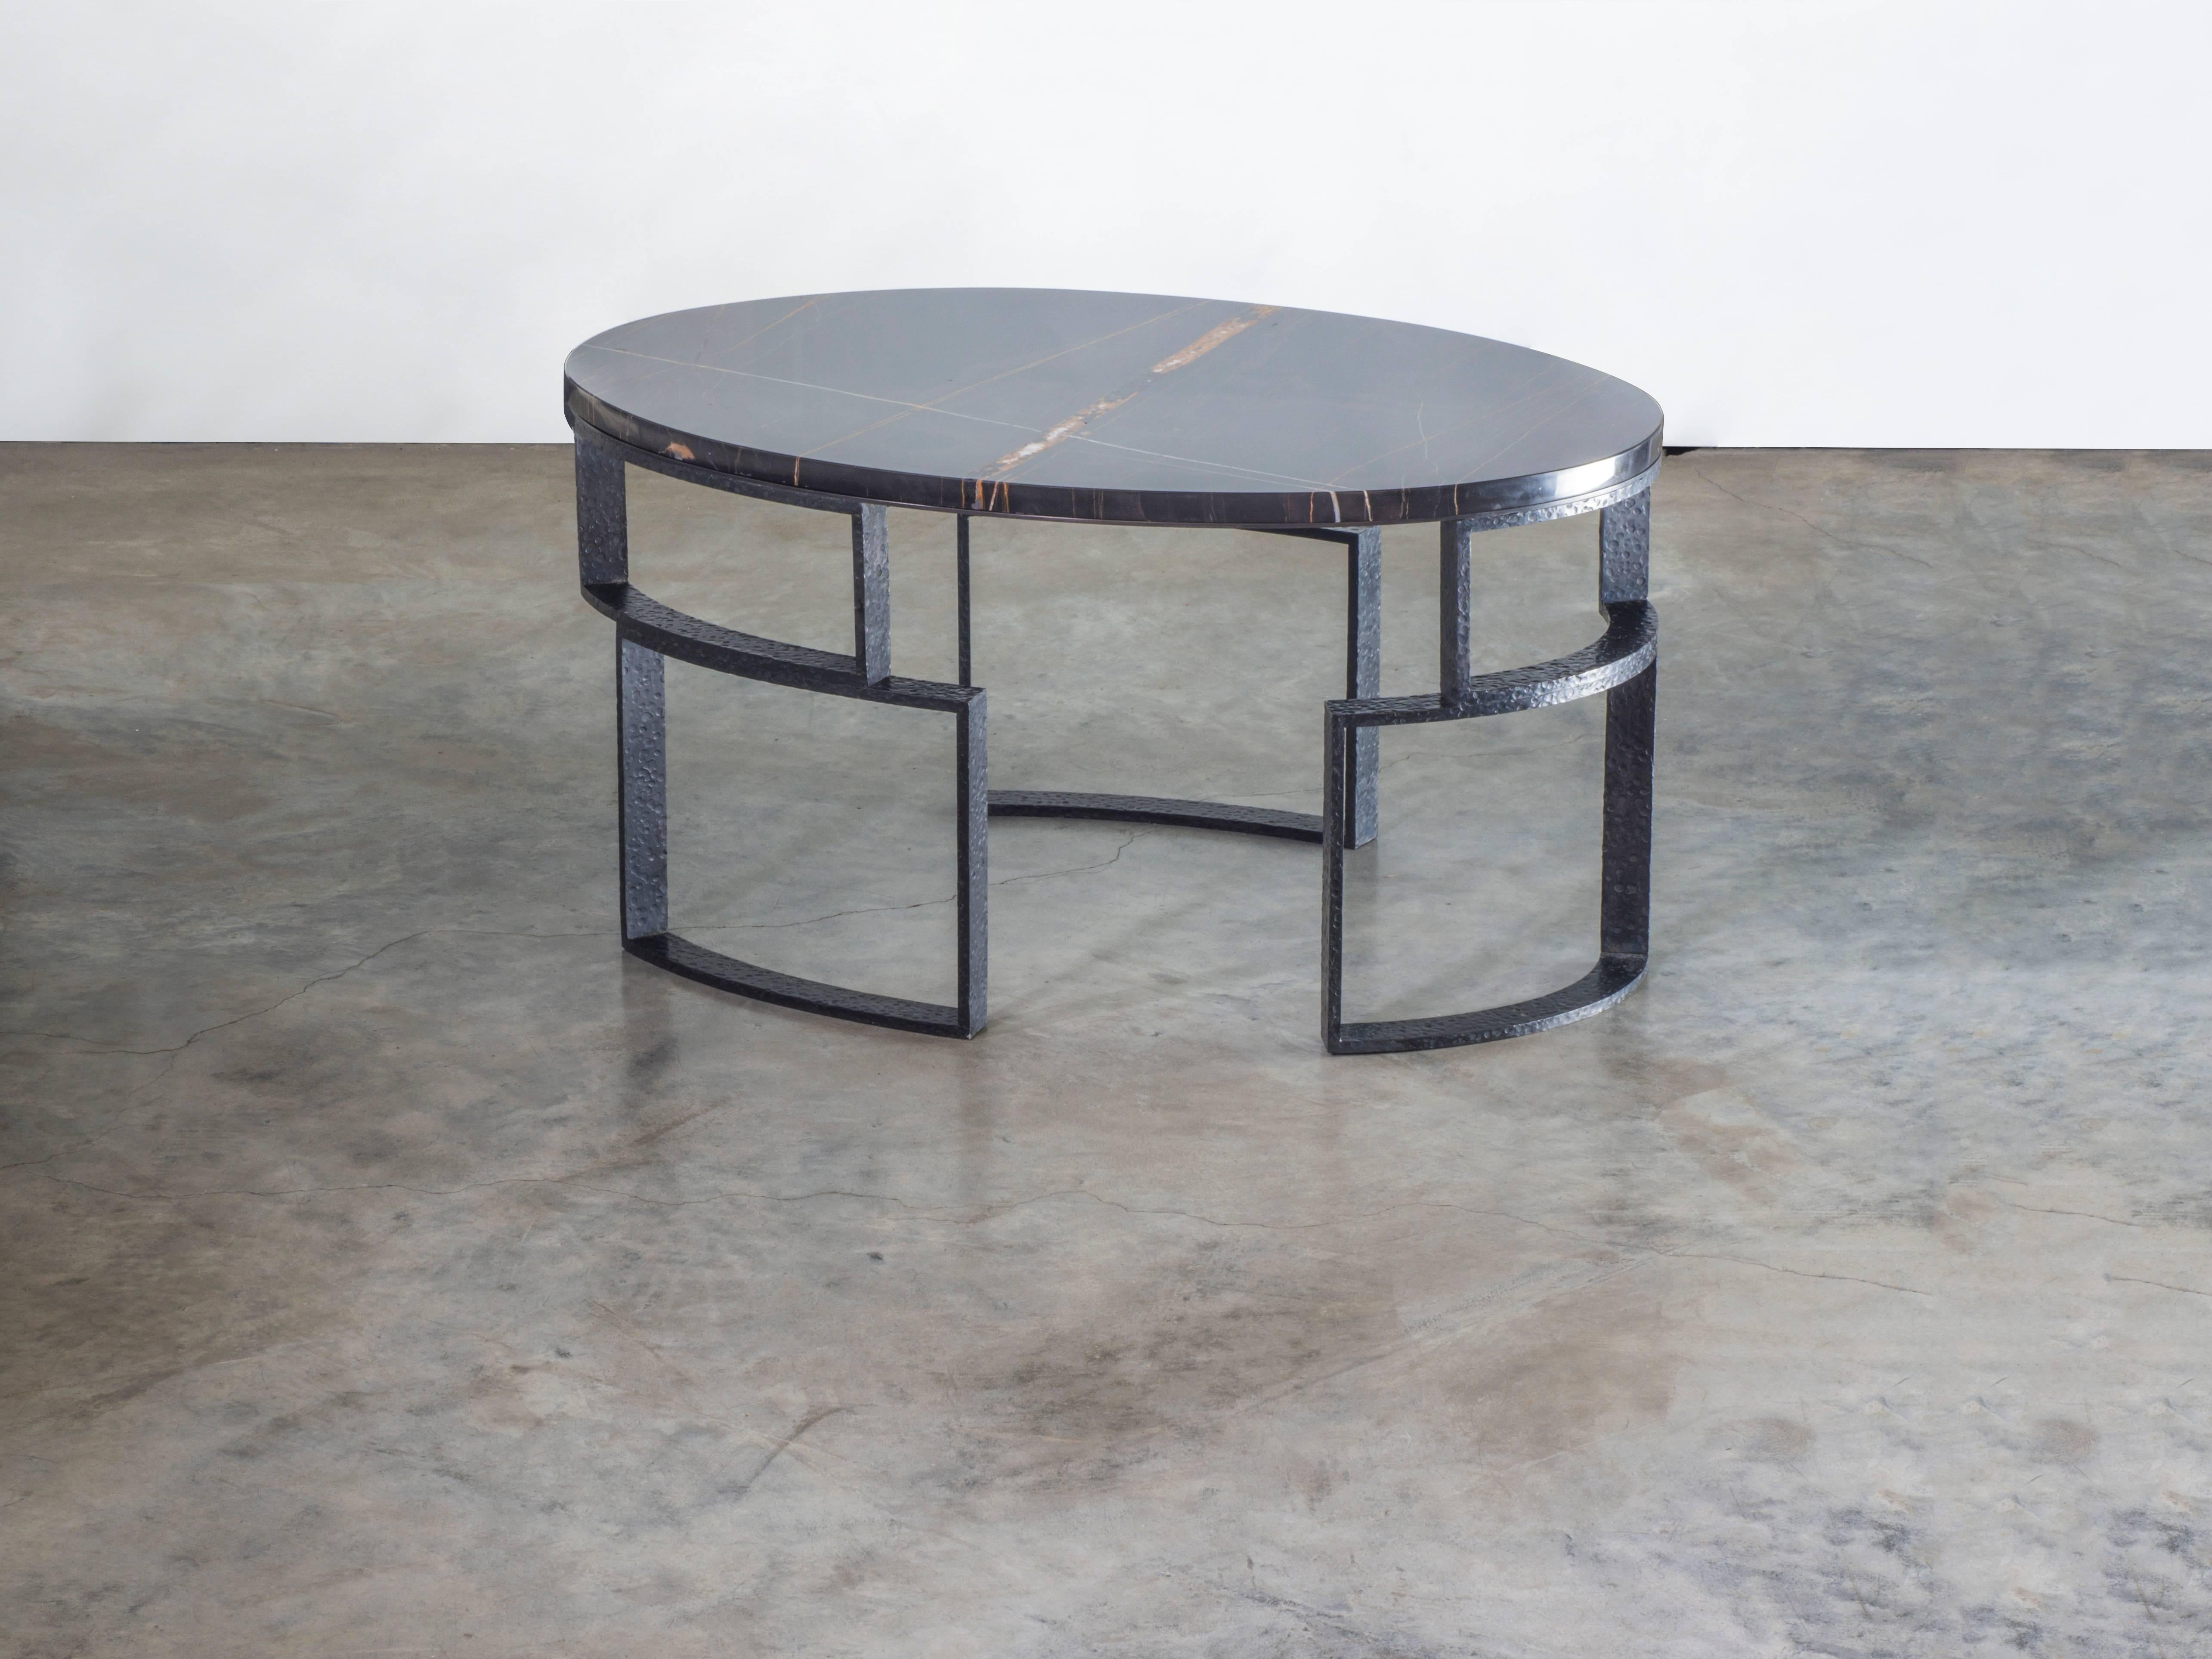 Contemporary Hammered Windows Ellipse Table with Noir Doré Top and Burnished Hammered Steel For Sale